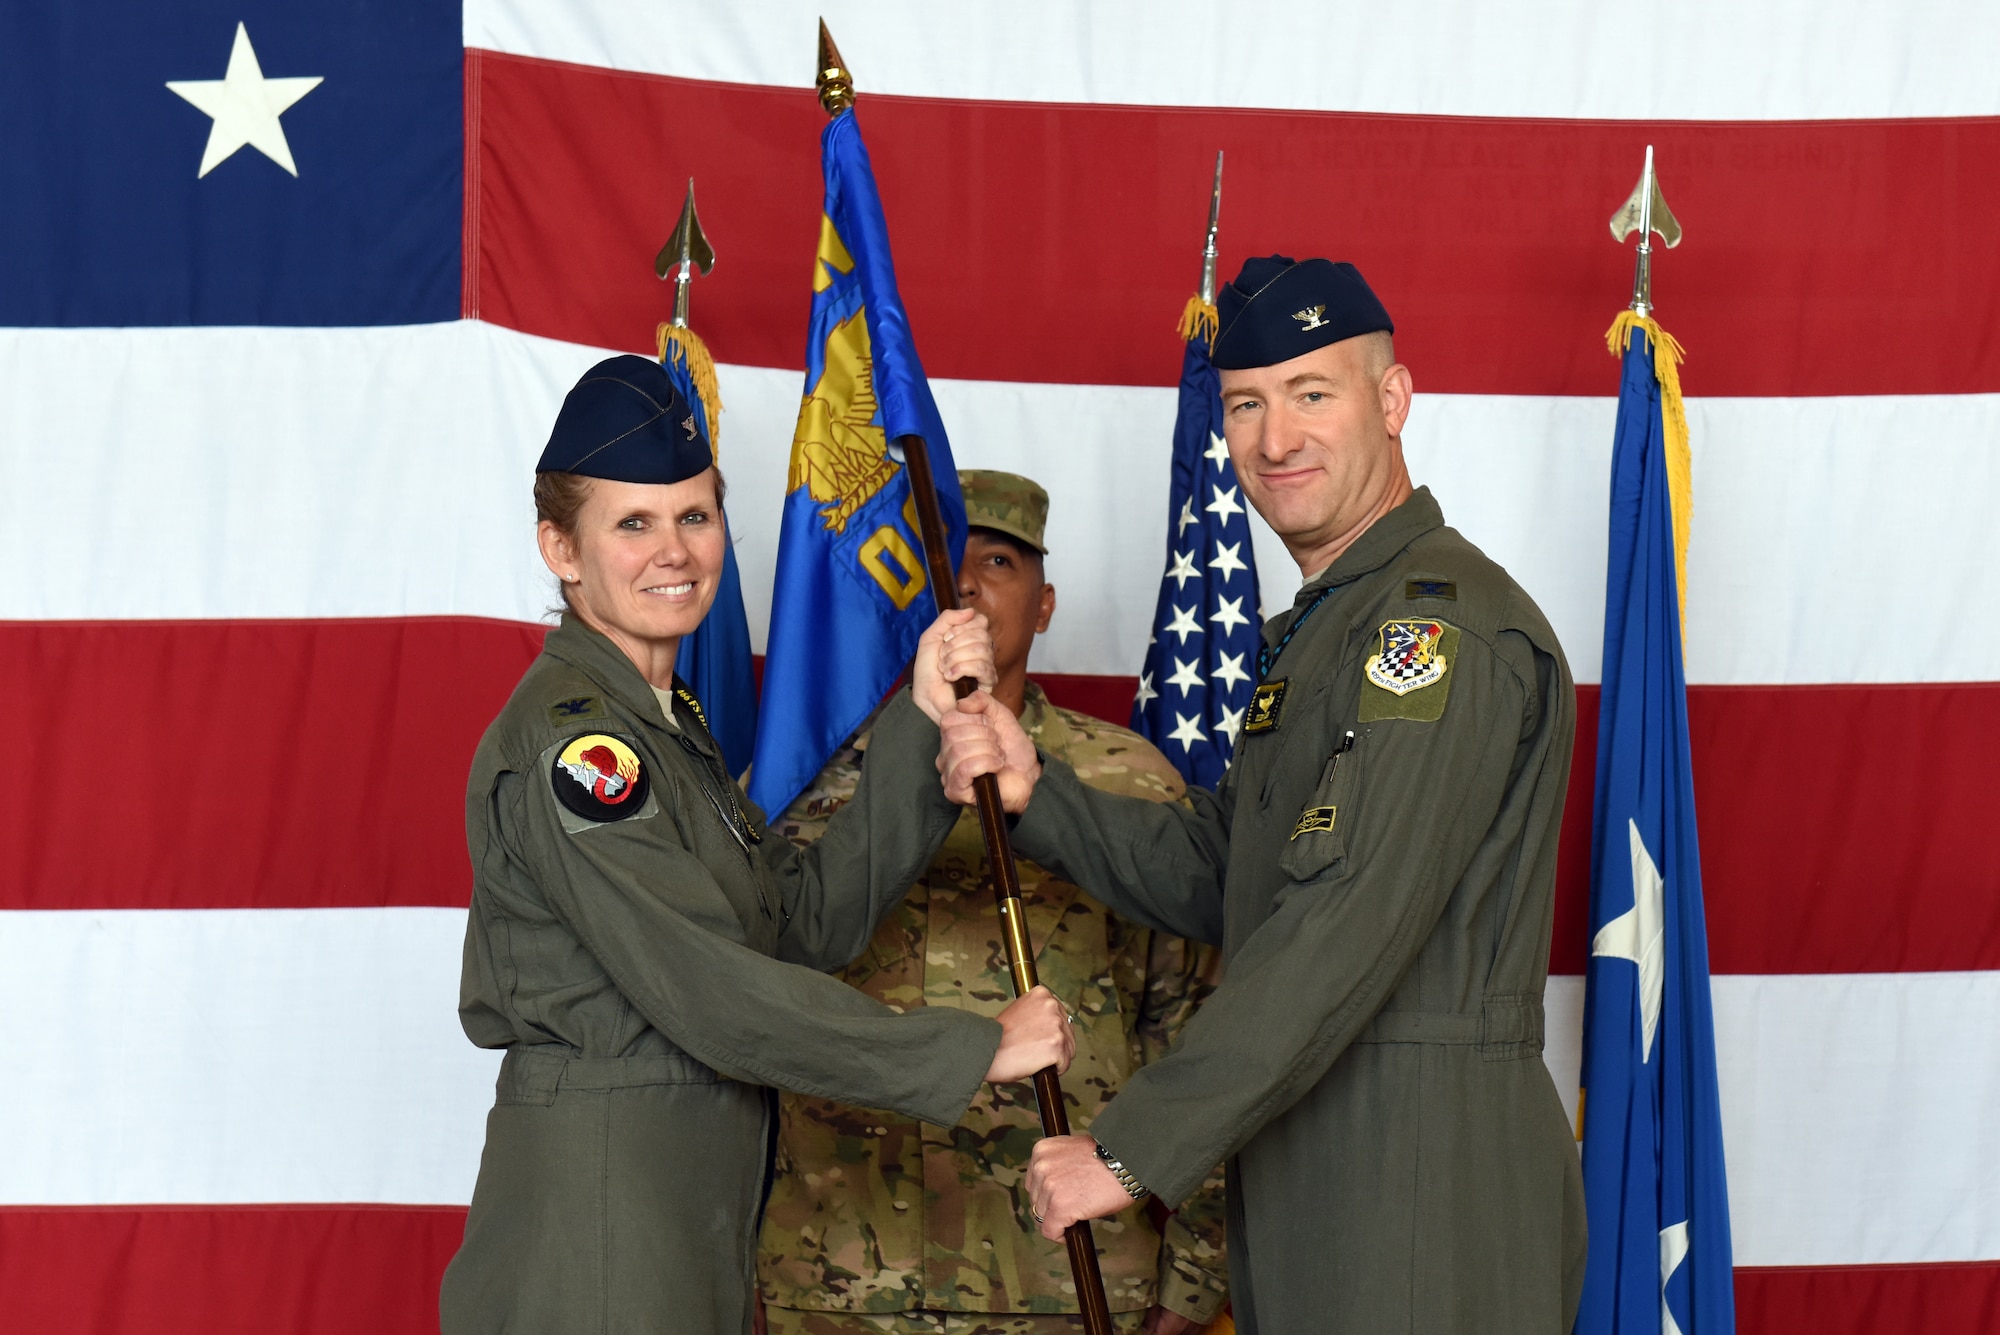 Col. Regina Sabric, 419th Fighter Wing commander, passes the group flag to Col. Mathew Miller, the new commander of the 419th Operations Group, during a change of command ceremony Aug. 3, 2019, at Hill Air Force Base, Utah.